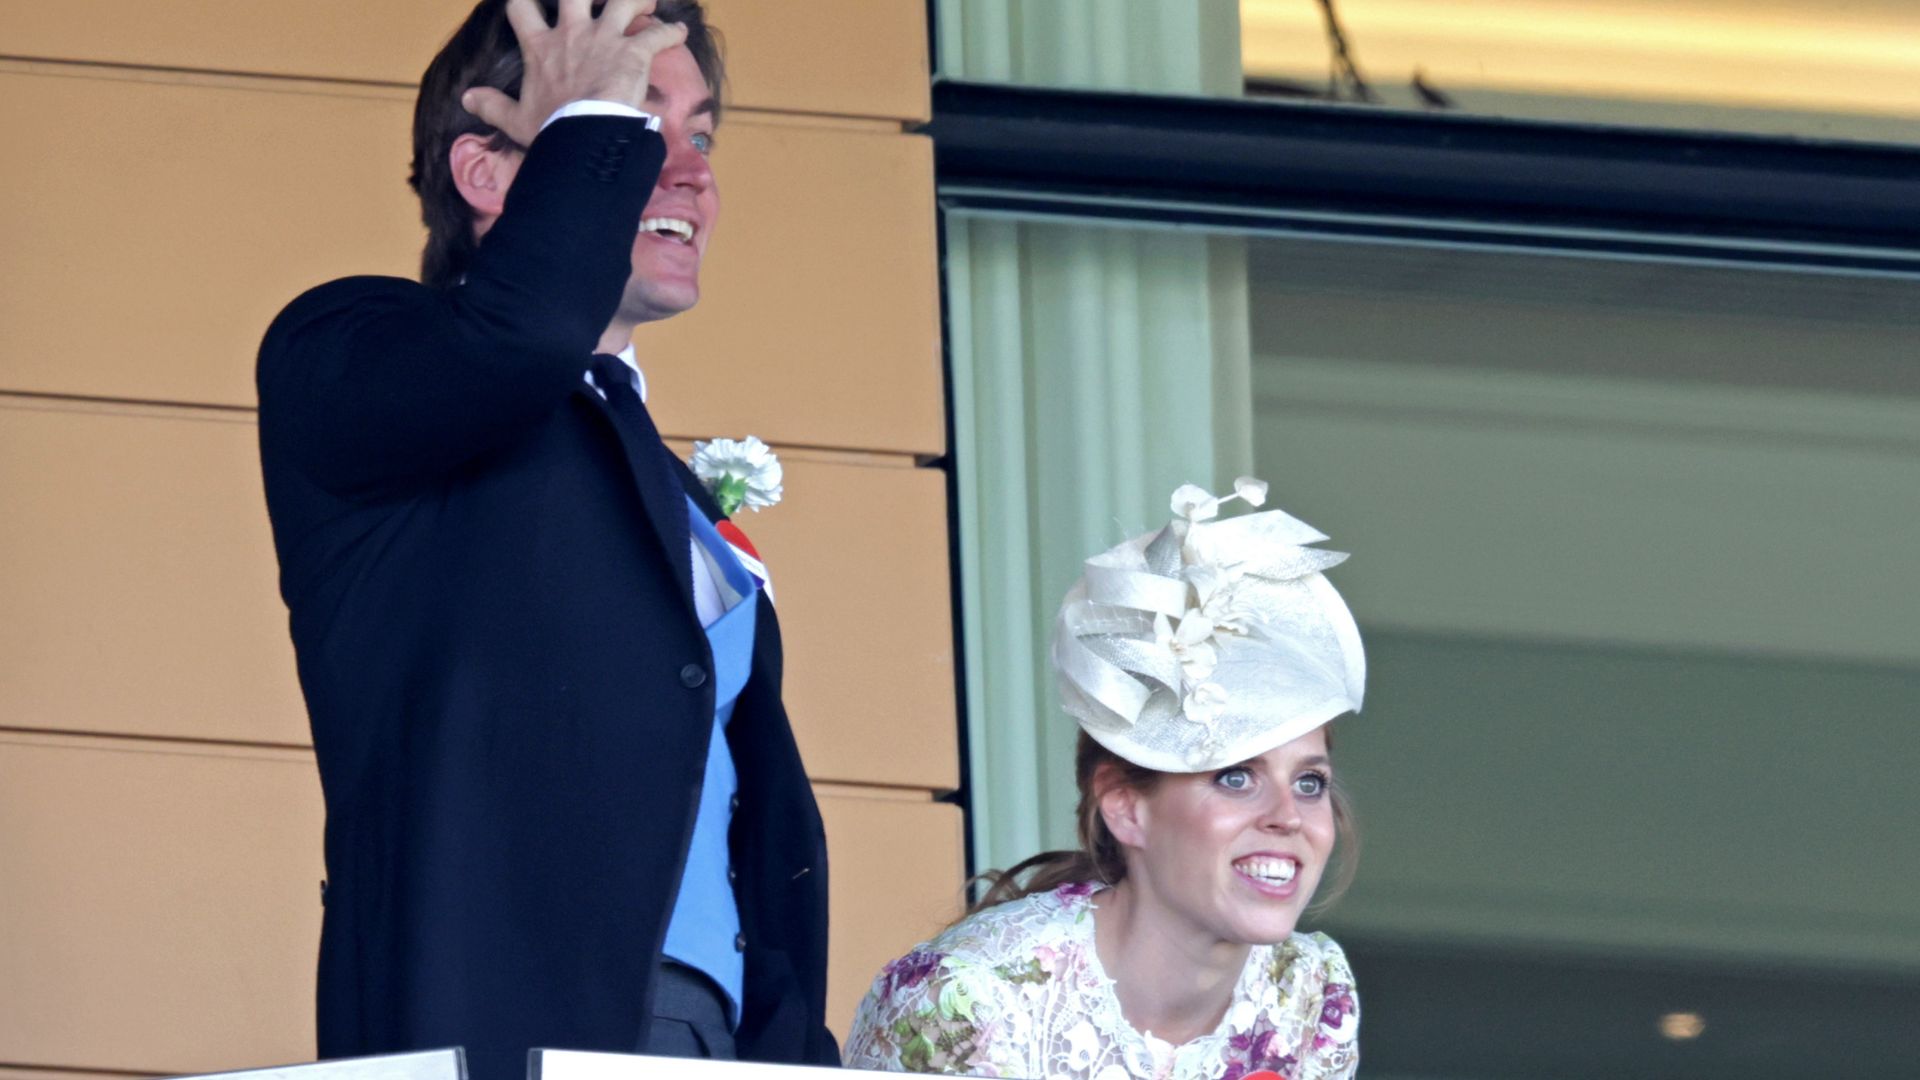 Royal Ascot Day 4: Princess Beatrice Dons a Lace Floral Gown | Woman & Home